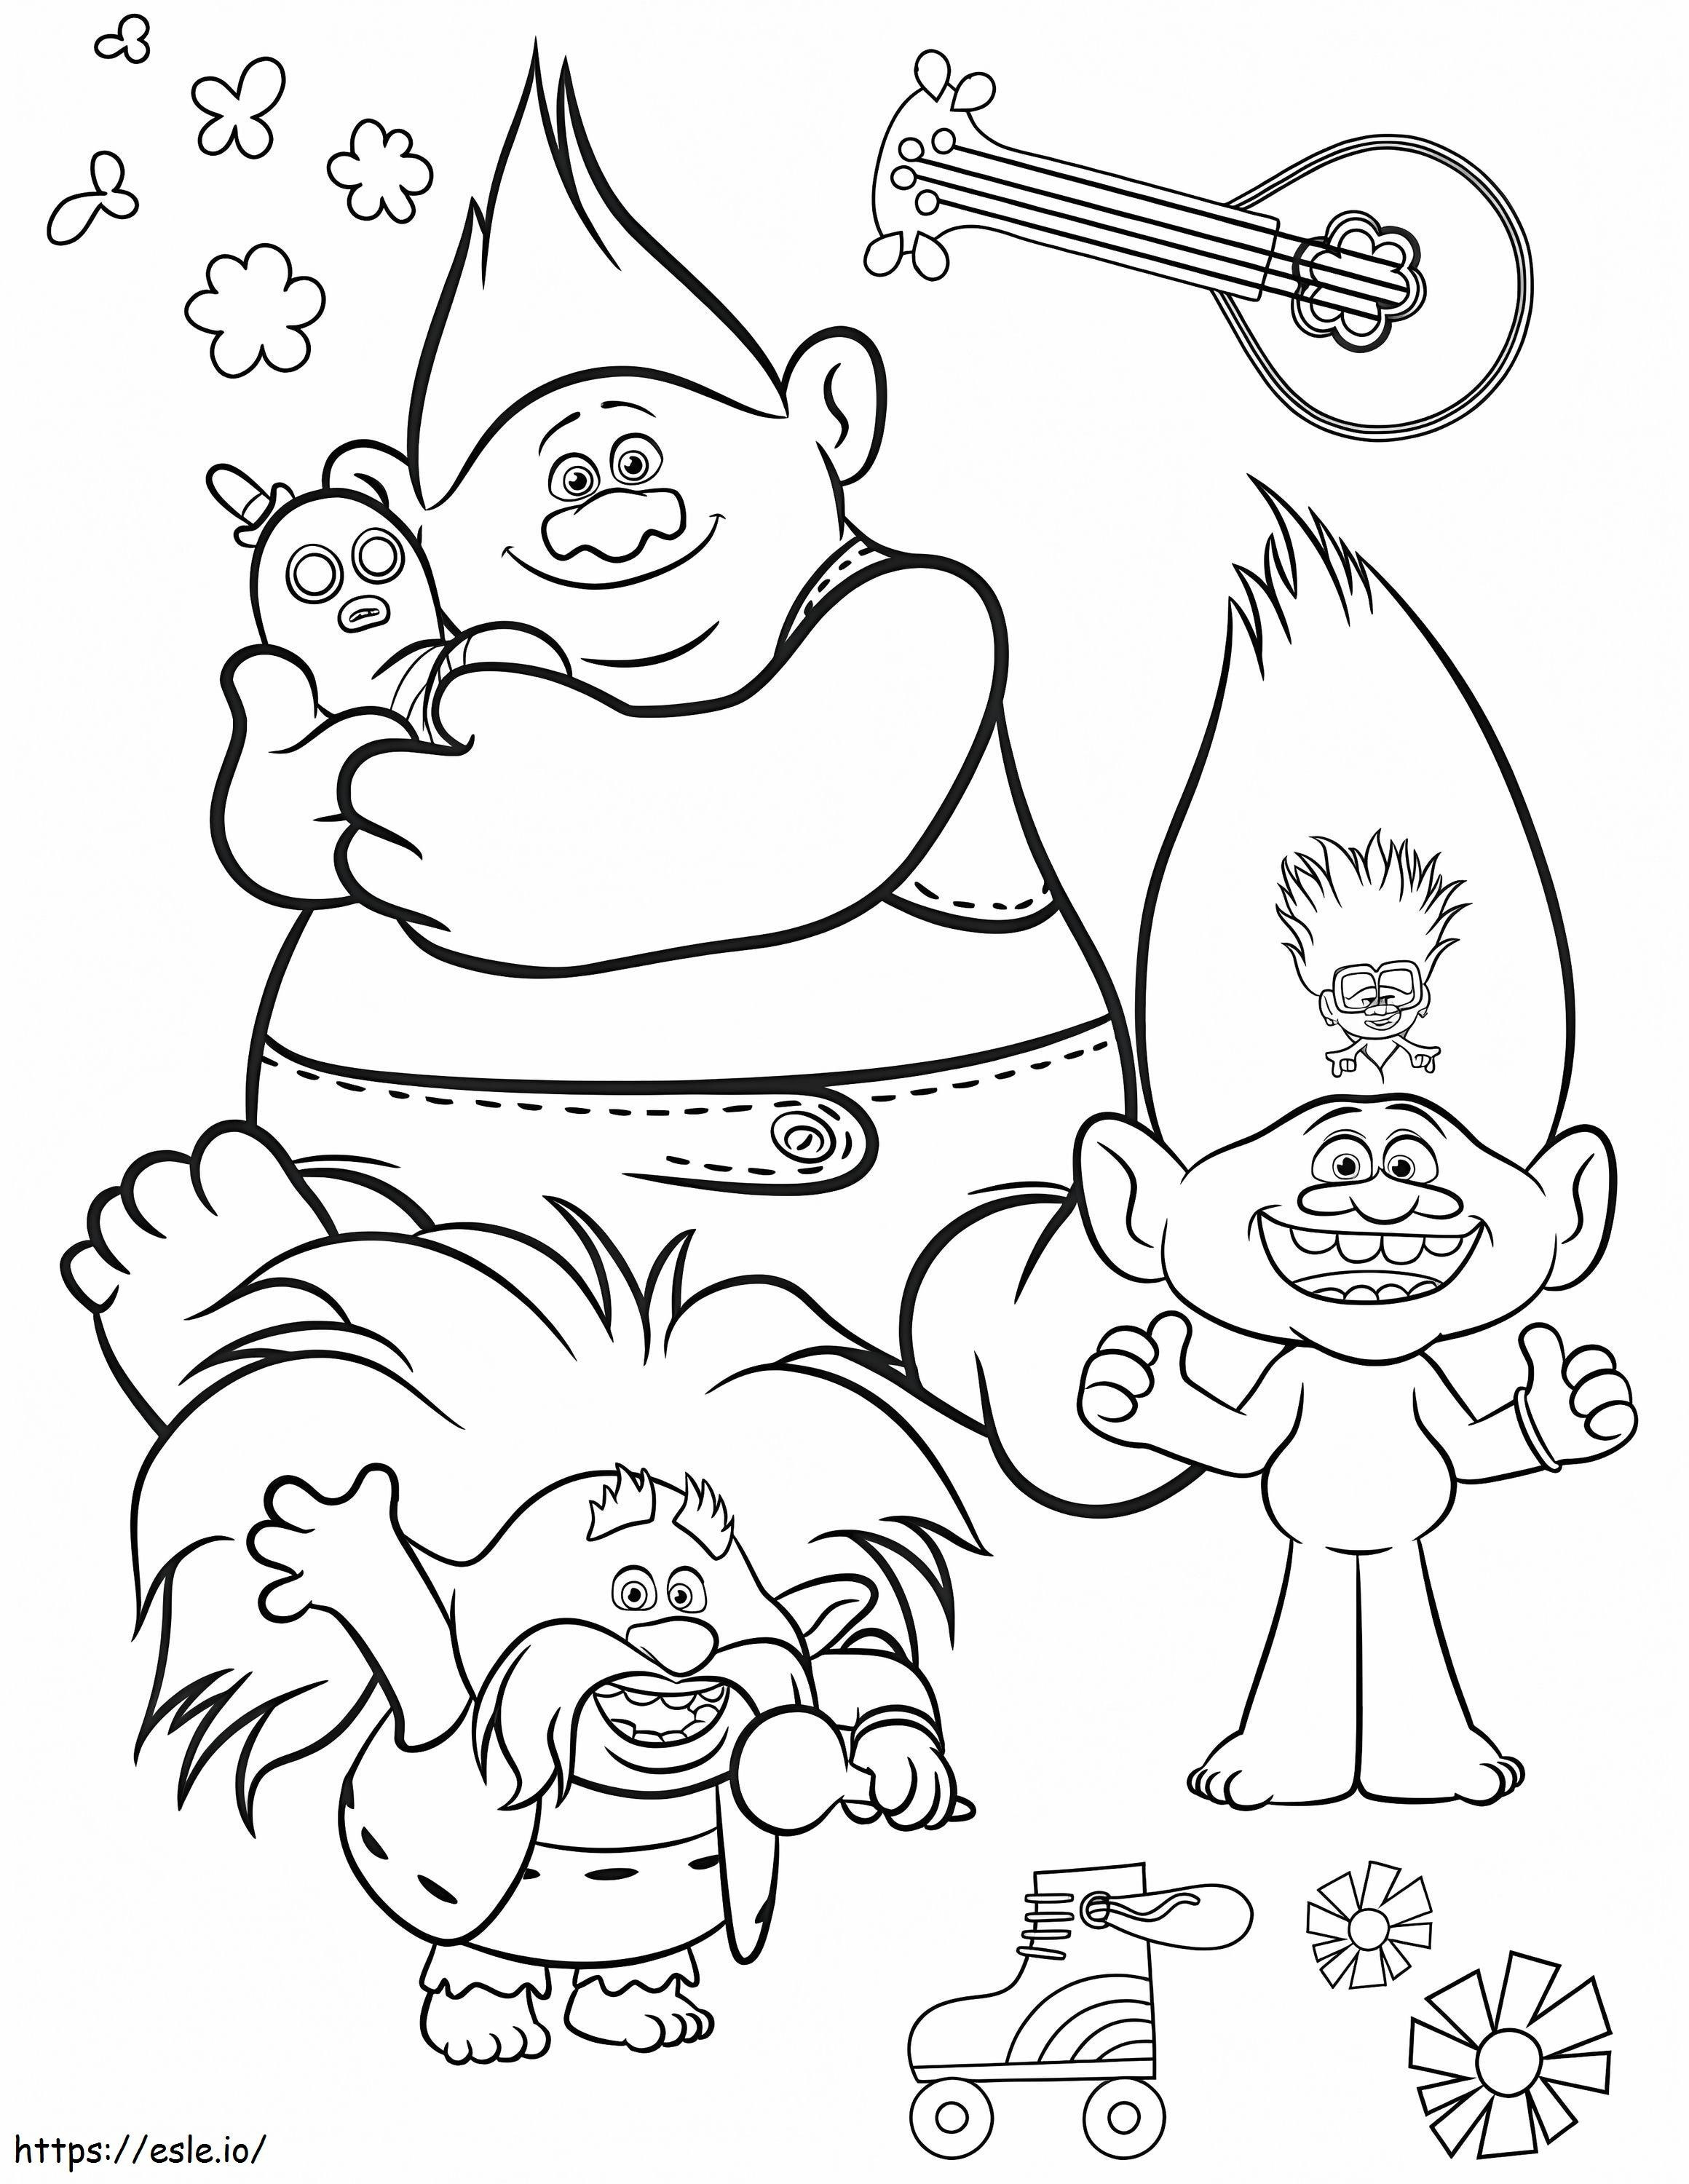 Troll Musicians coloring page